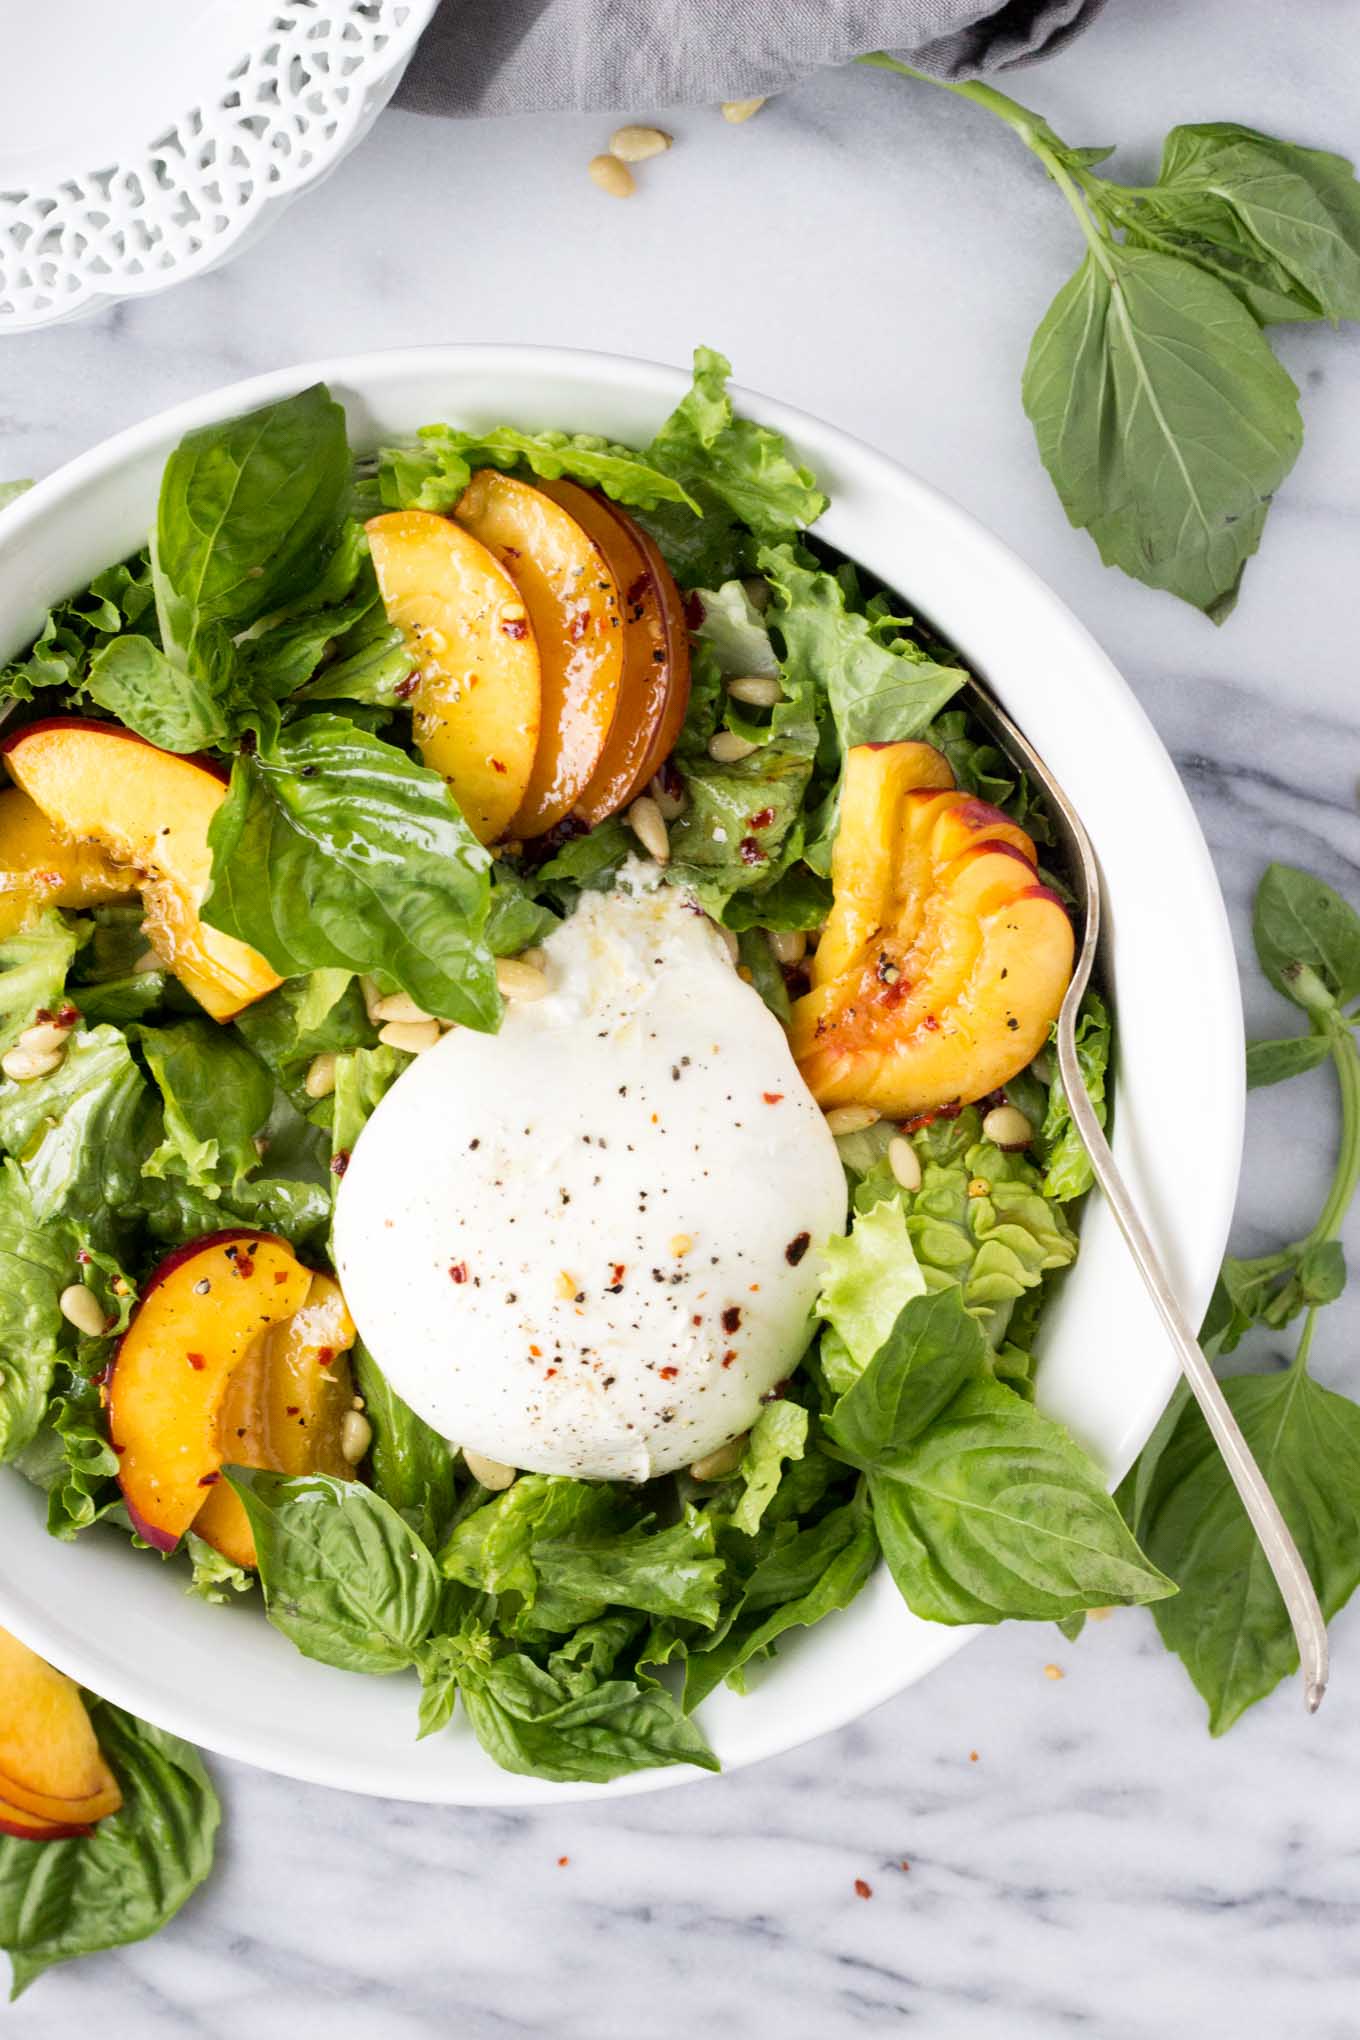 Nectarine Burrata Basil Salad - A cheese-board inspired salad with sweet nectarines, creamy burrata, fresh basil, and crunchy pine nuts tossed with a tangy, peppery dressing. | Fork in the Kitchen